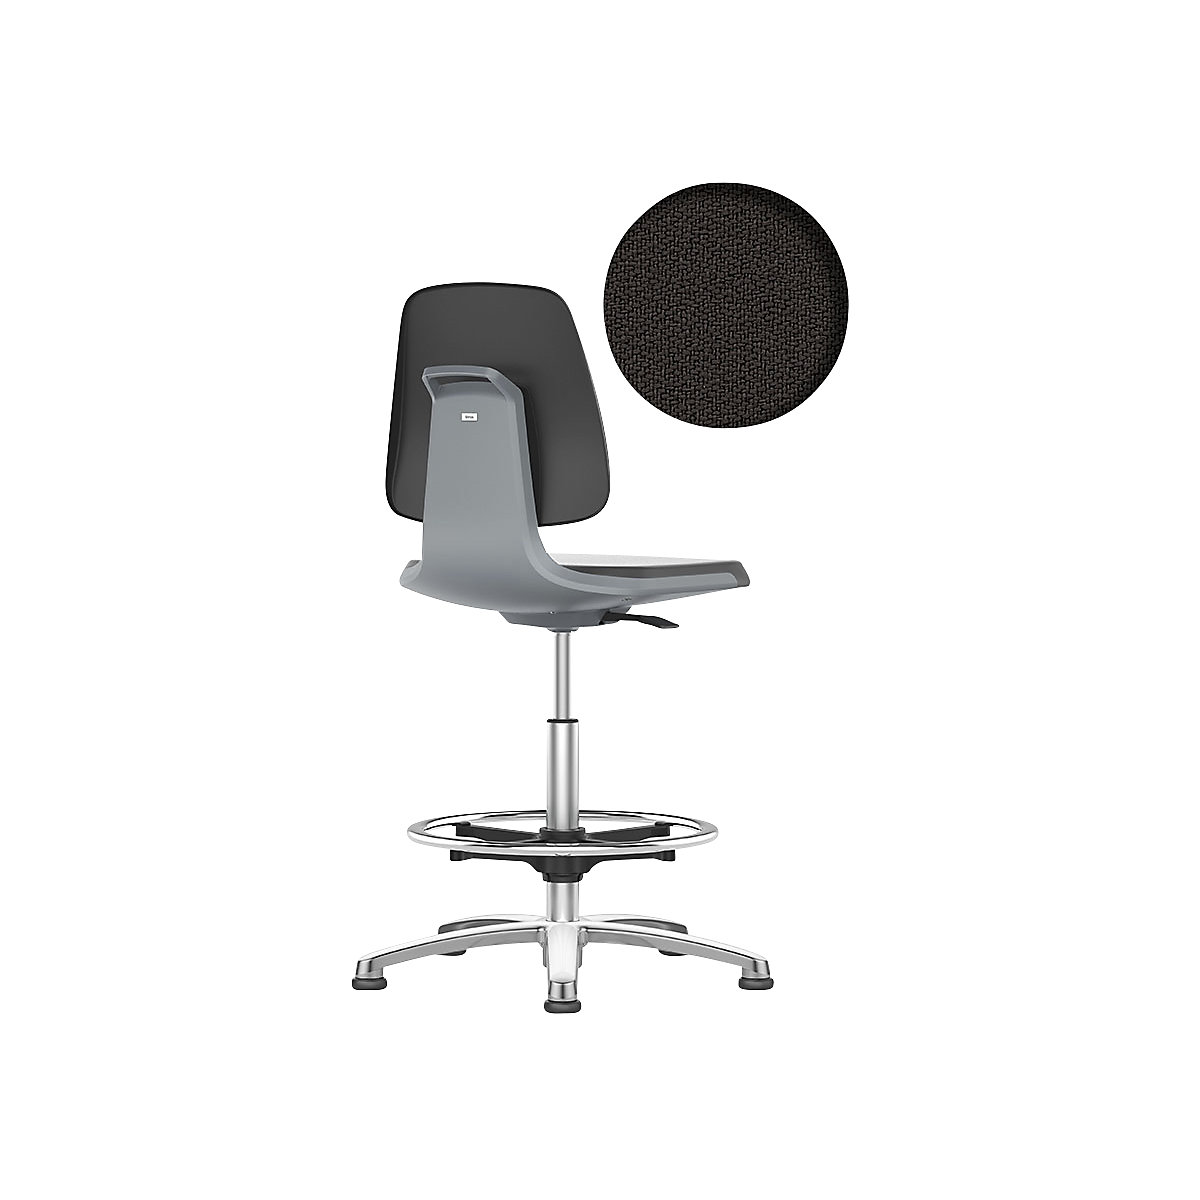 LABSIT industrial swivel chair – bimos, with floor glides and foot ring, fabric upholstered seat, charcoal-13